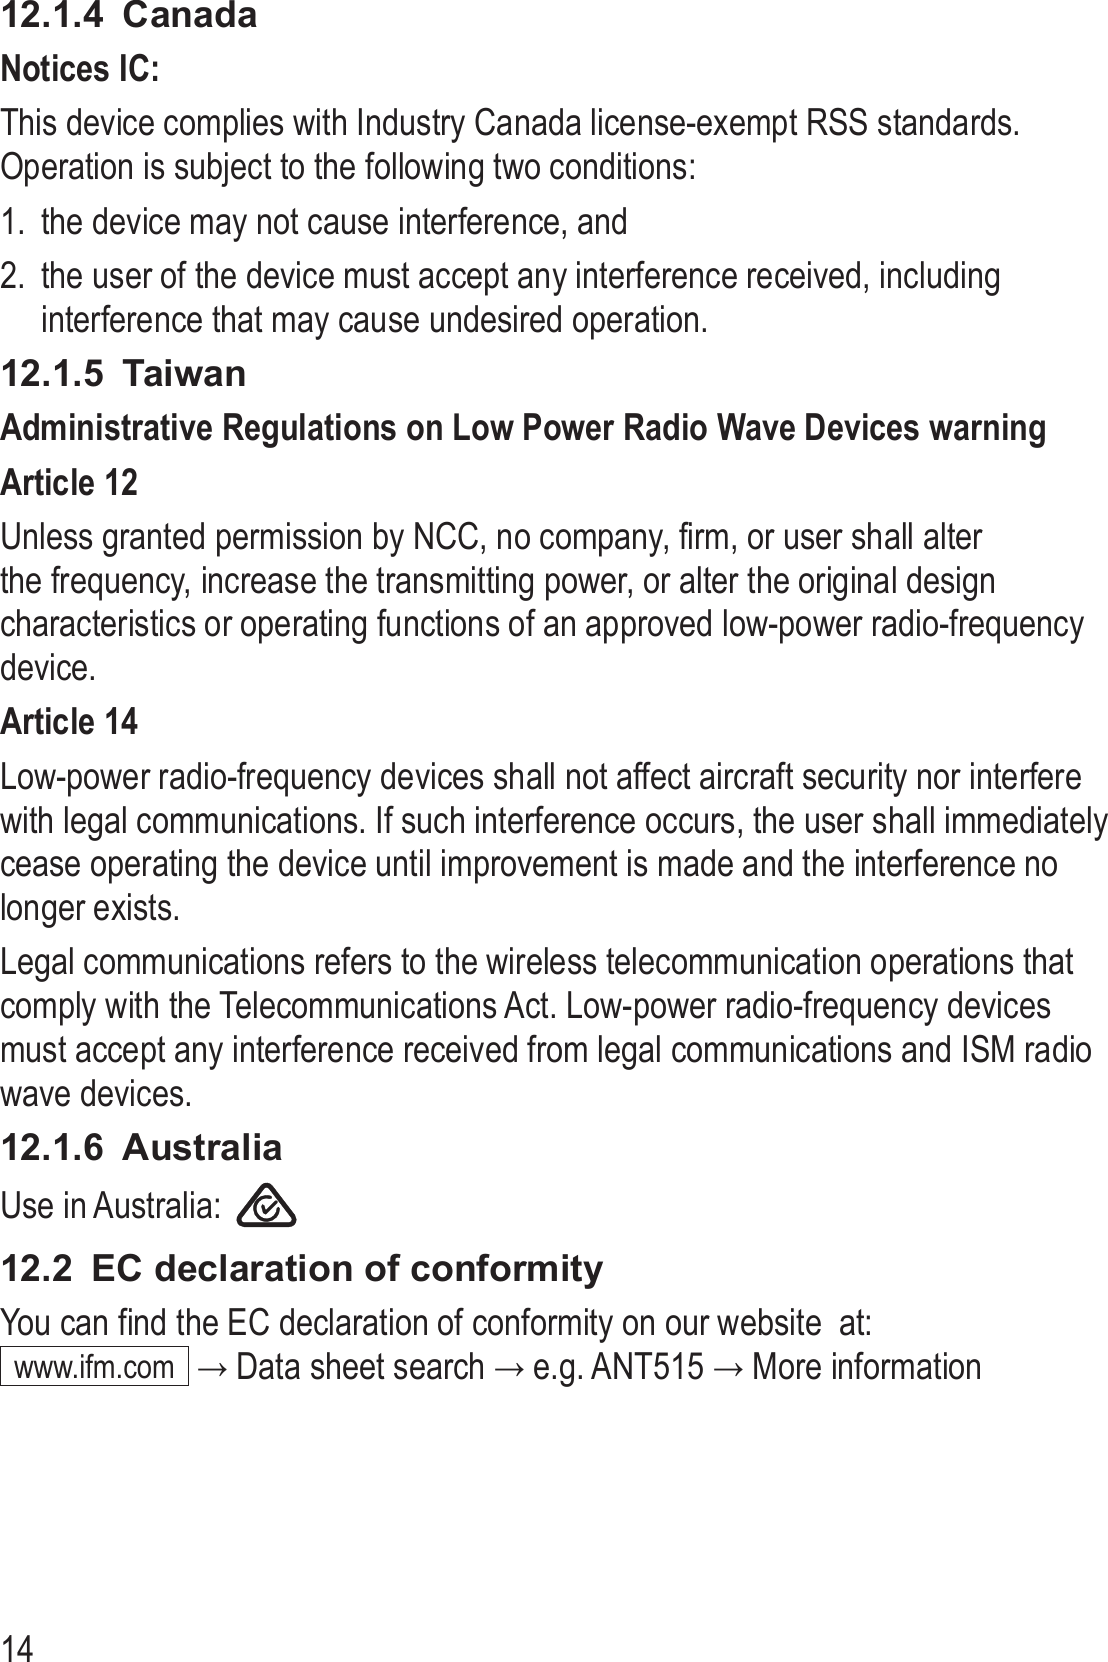 1412.1.4  CanadaNotices IC:This device complies with Industry Canada license-exempt RSS standards� Operation is subject to the following two conditions:1�  the device may not cause interference, and2�  the user of the device must accept any interference received, including interference that may cause undesired operation�12.1.5  TaiwanAdministrative Regulations on Low Power Radio Wave Devices warningArticle 12Unless granted permission by NCC, no company, firm, or user shall alter the frequency, increase the transmitting power, or alter the original design characteristics or operating functions of an approved low-power radio-frequency device�Article 14Low-power radio-frequency devices shall not affect aircraft security nor interfere with legal communications� If such interference occurs, the user shall immediately cease operating the device until improvement is made and the interference no longer exists�Legal communications refers to the wireless telecommunication operations that comply with the Telecommunications Act� Low-power radio-frequency devices must accept any interference received from legal communications and ISM radio wave devices�12.1.6  AustraliaUse in Australia:    12.2  EC declaration of conformityYou can find the EC declaration of conformity on our website  at: www�ifm�com  → Data sheet search → e.g. ANT515 → More information